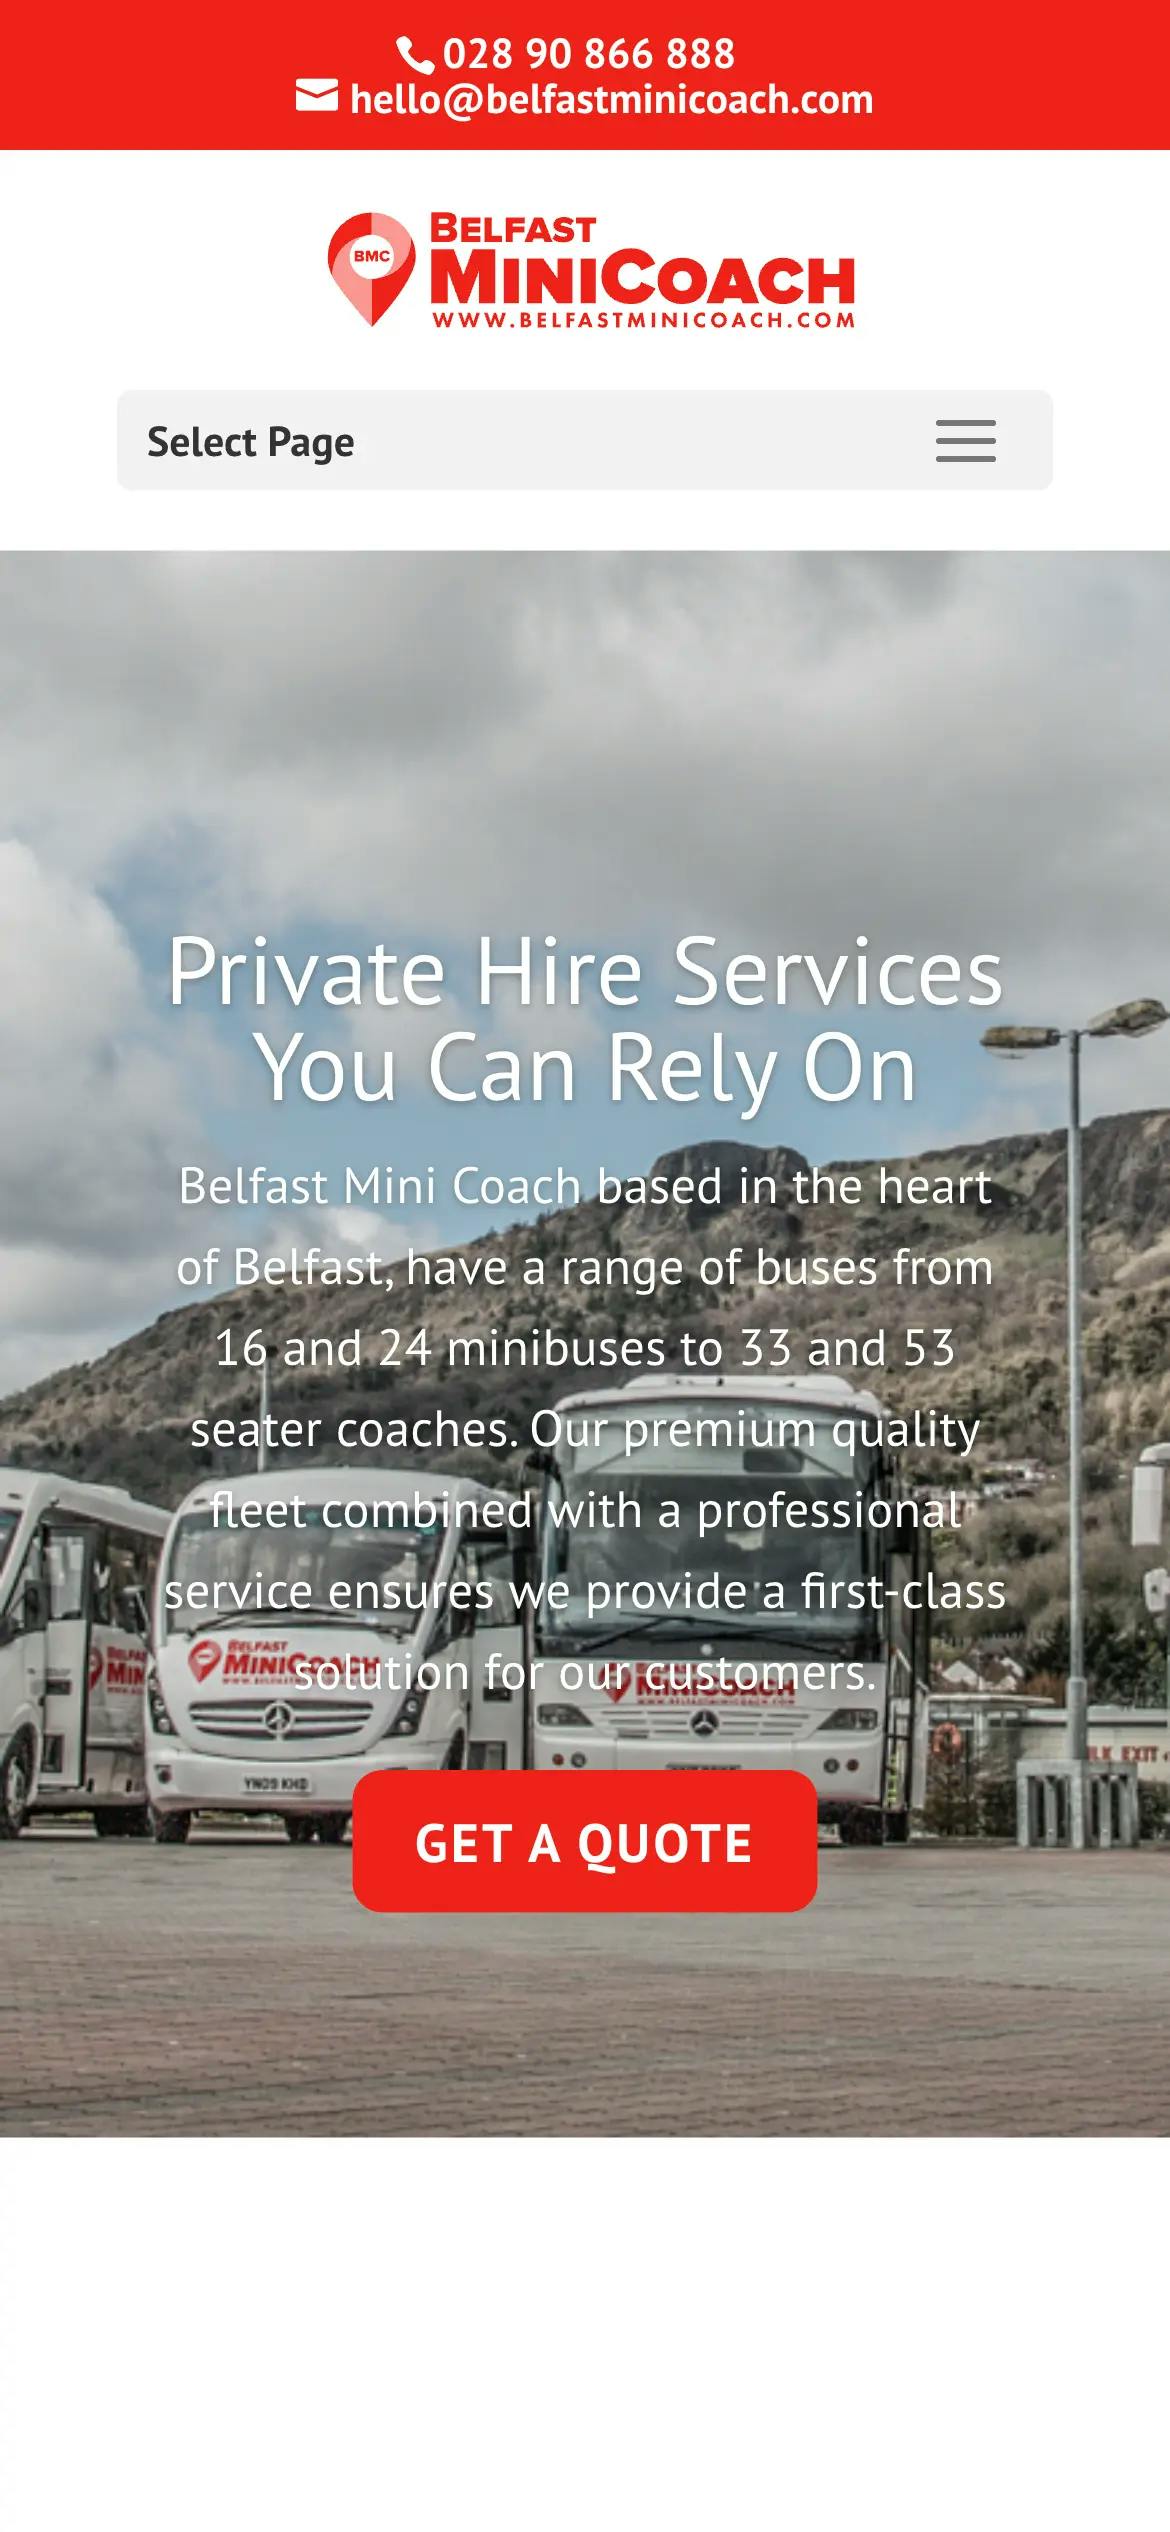 Belfast Mini Coach home page on mobile